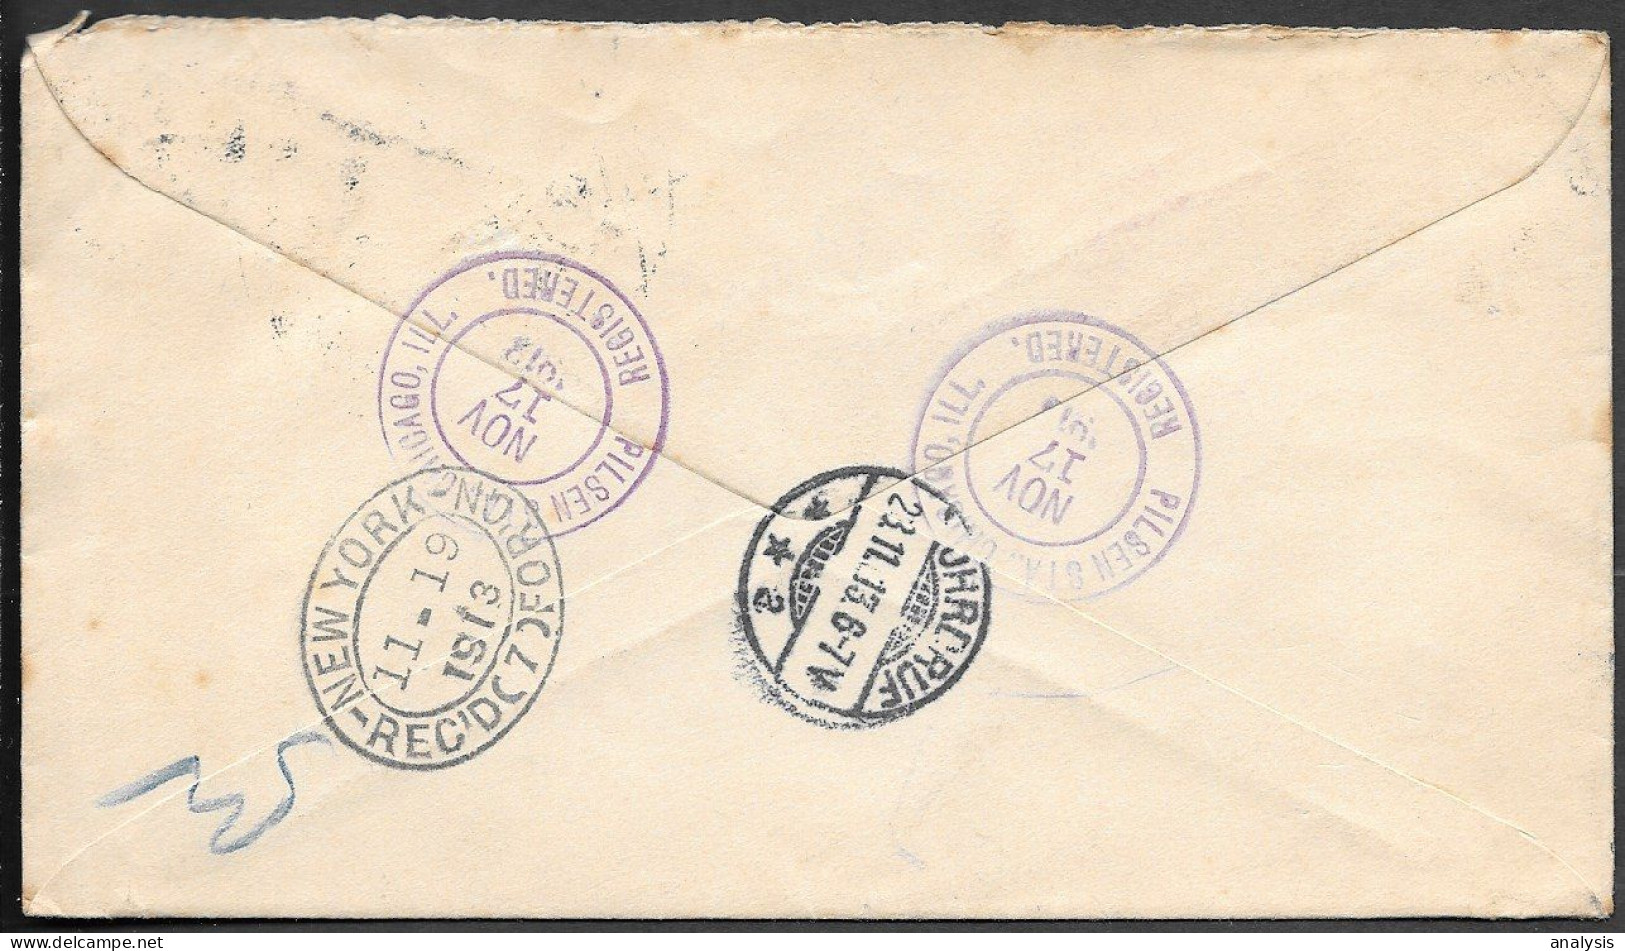 USA Chicago Registered Uprated 2c Postal Stationery Cover Mailed To Ohrdruf Germany 1913 - Covers & Documents